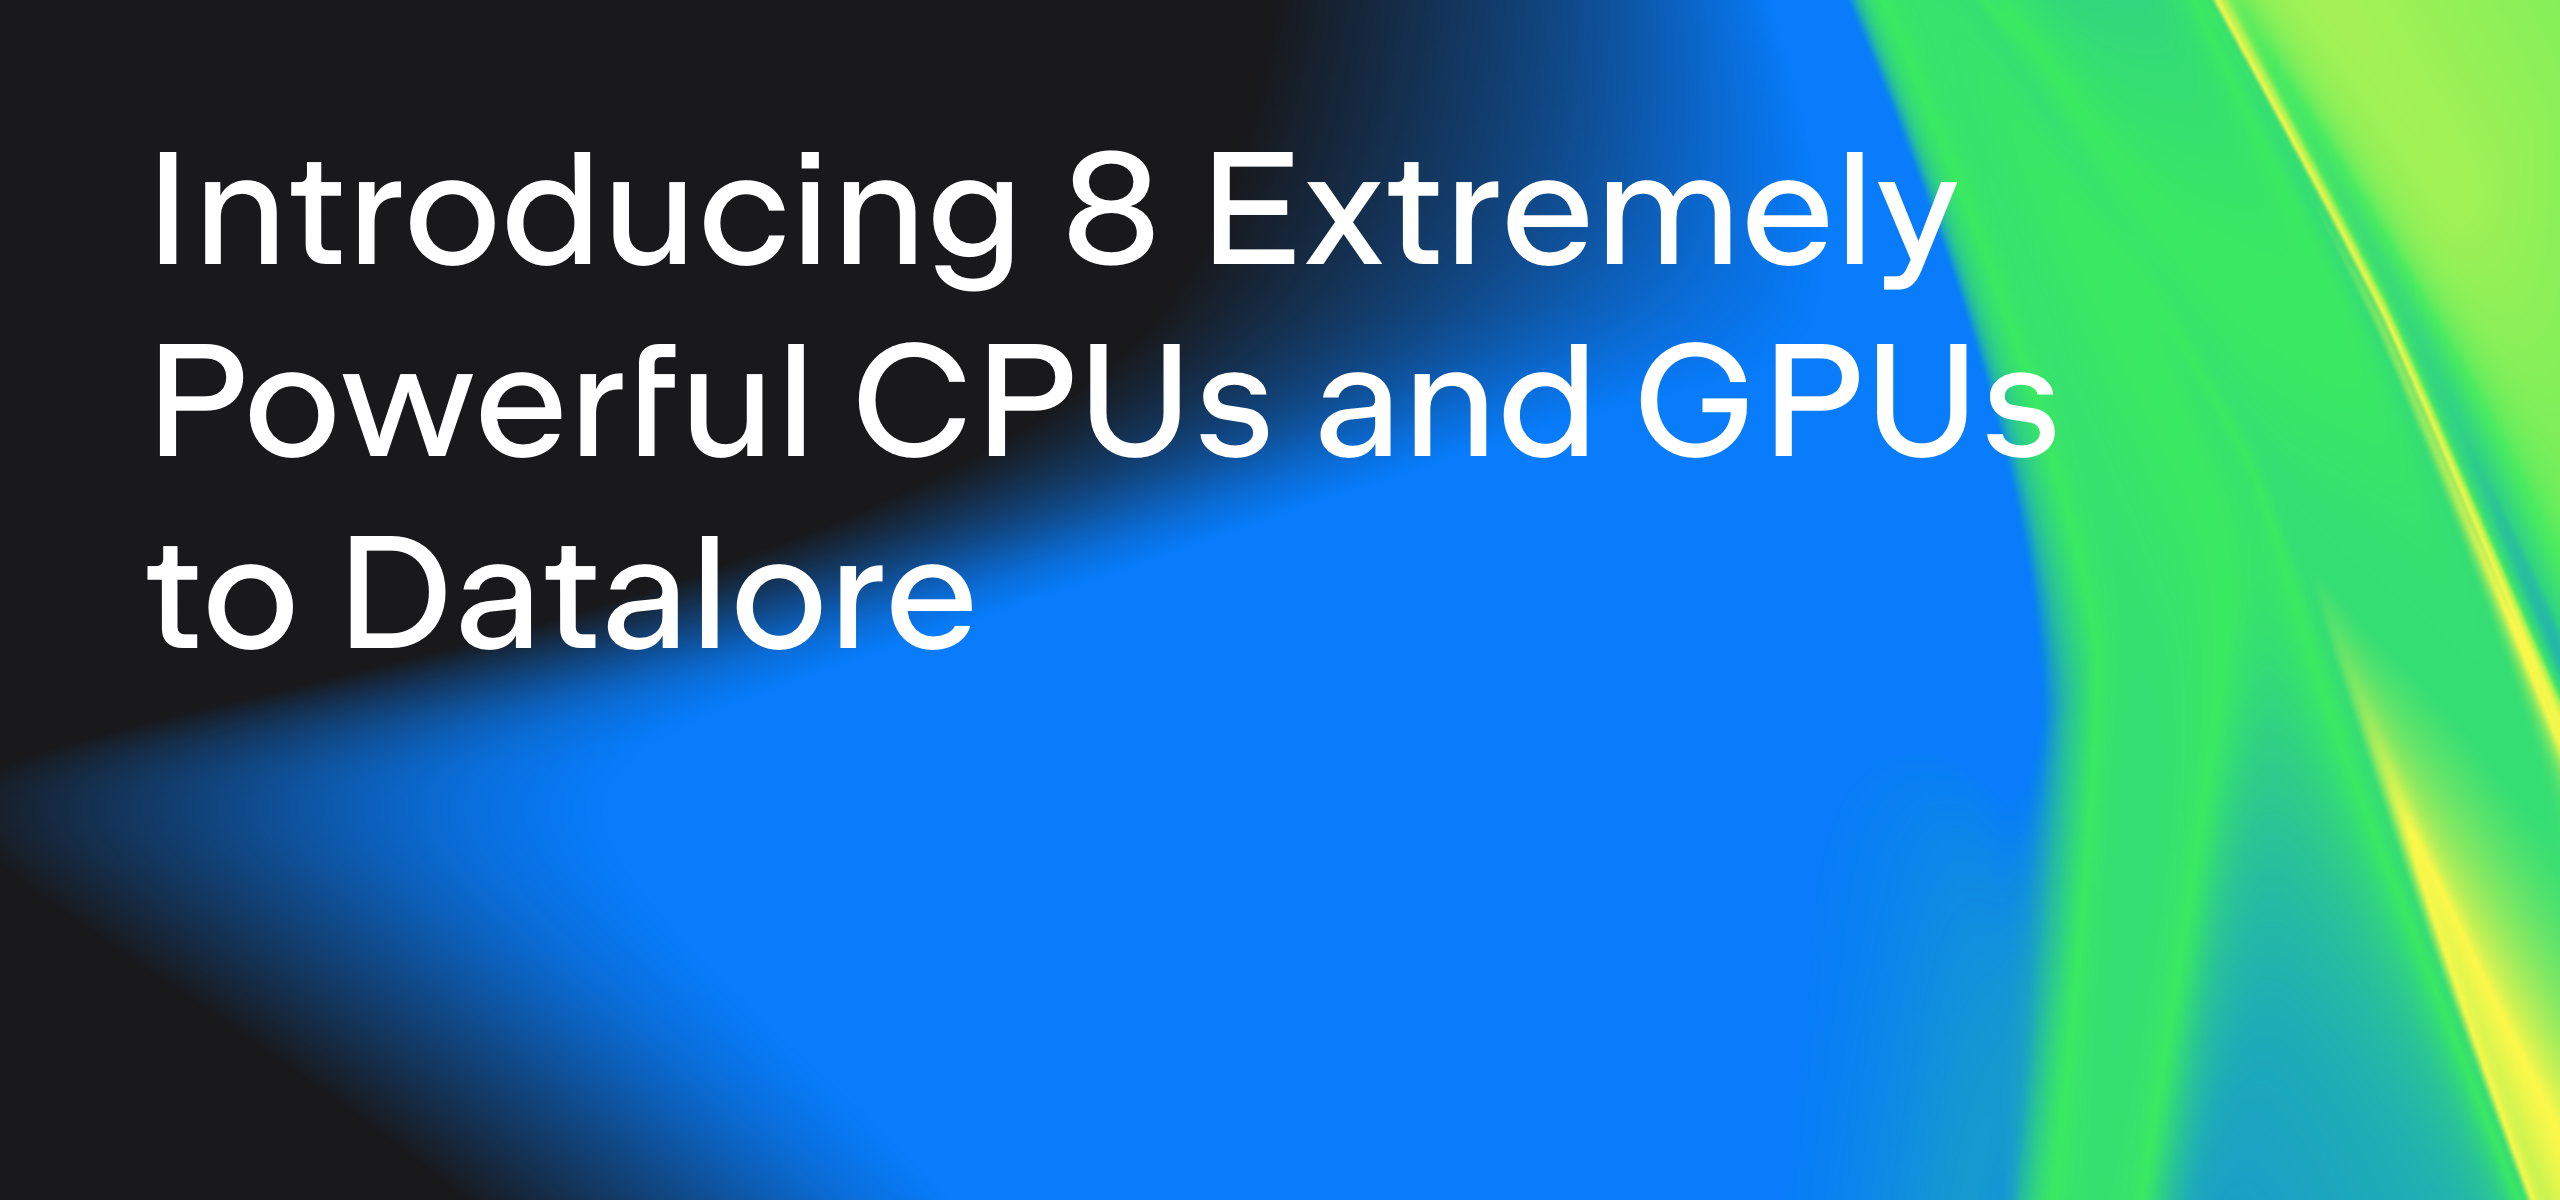 Introducing 8 Extremely Powerful CPUs and GPUs to Datalore